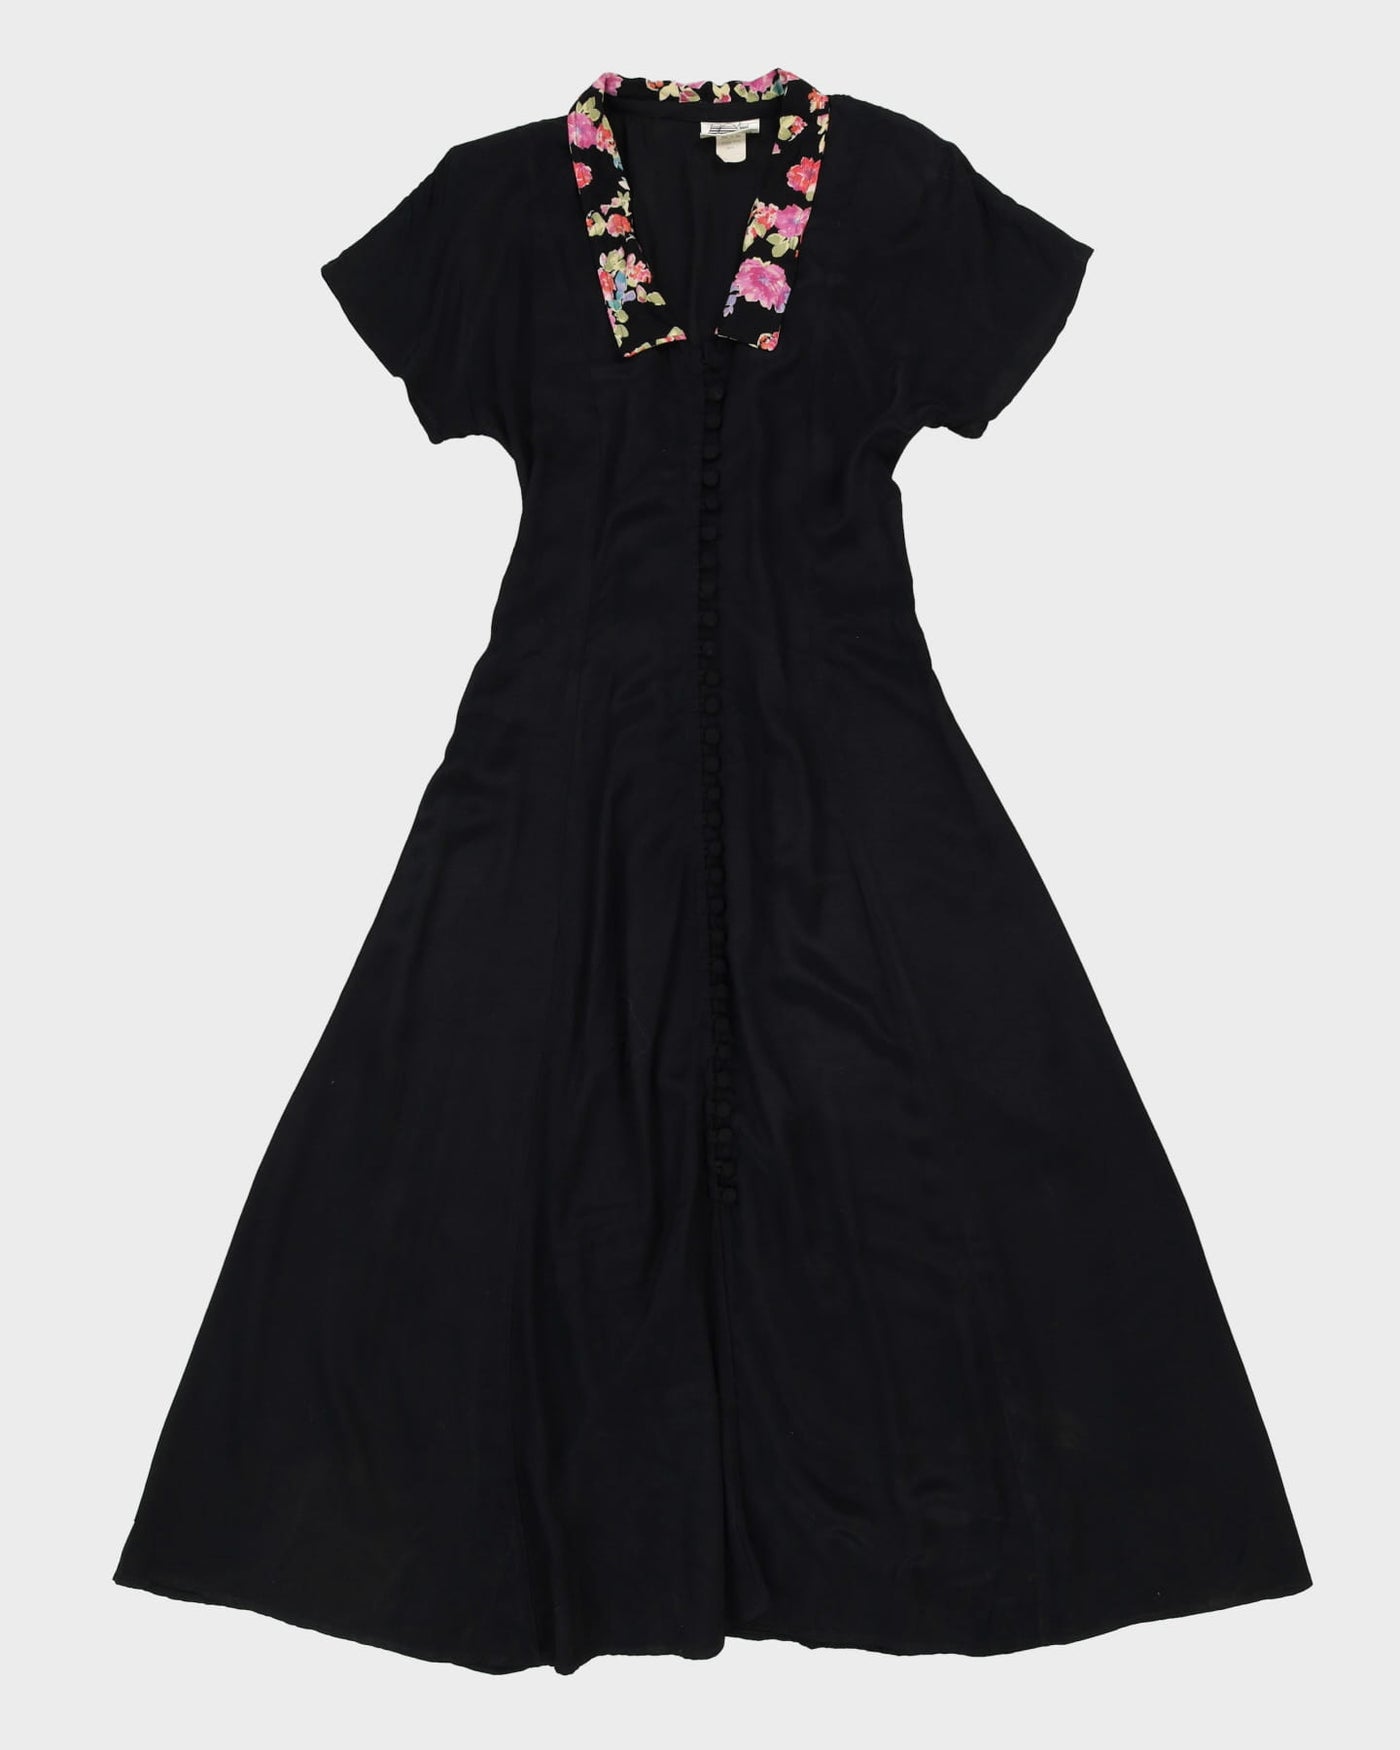 00s Black With Floral Collar Maxi Dress - S